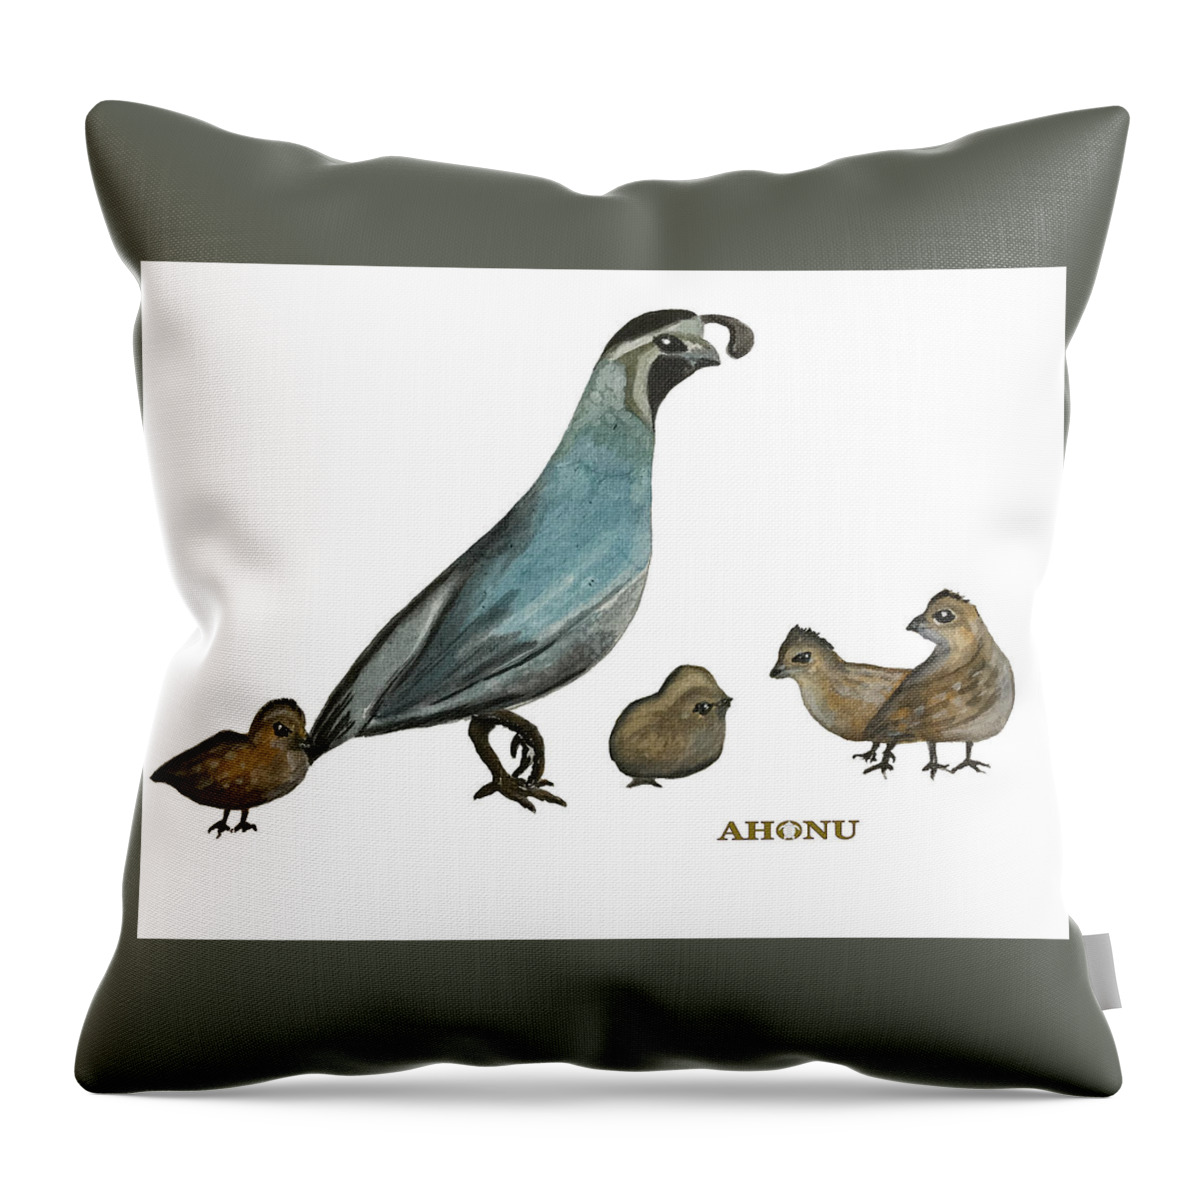 Quail Throw Pillow featuring the painting Quail Family by AHONU Aingeal Rose